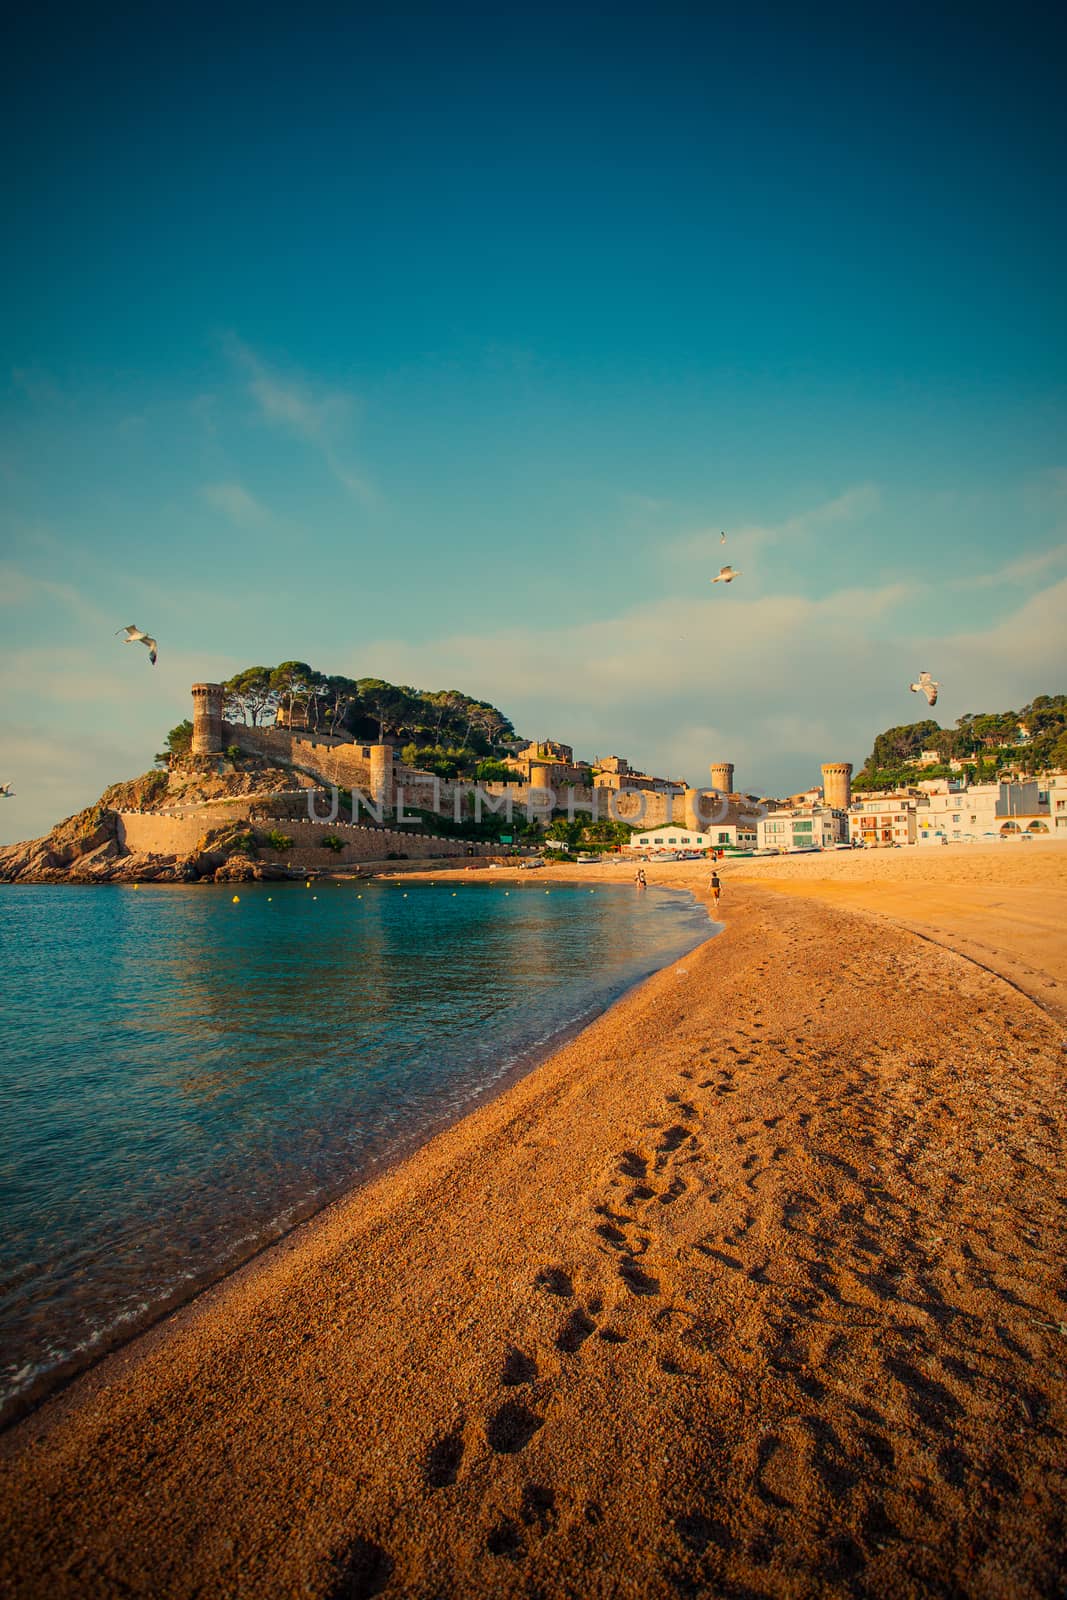 Tossa de Mar, Catalonia, Spain, JUNY 23, 2013, the panorama overlooking the bay Badia de Tossa and medieval fortress Vila Vella on a rock. Editorial use only. Instagram style image